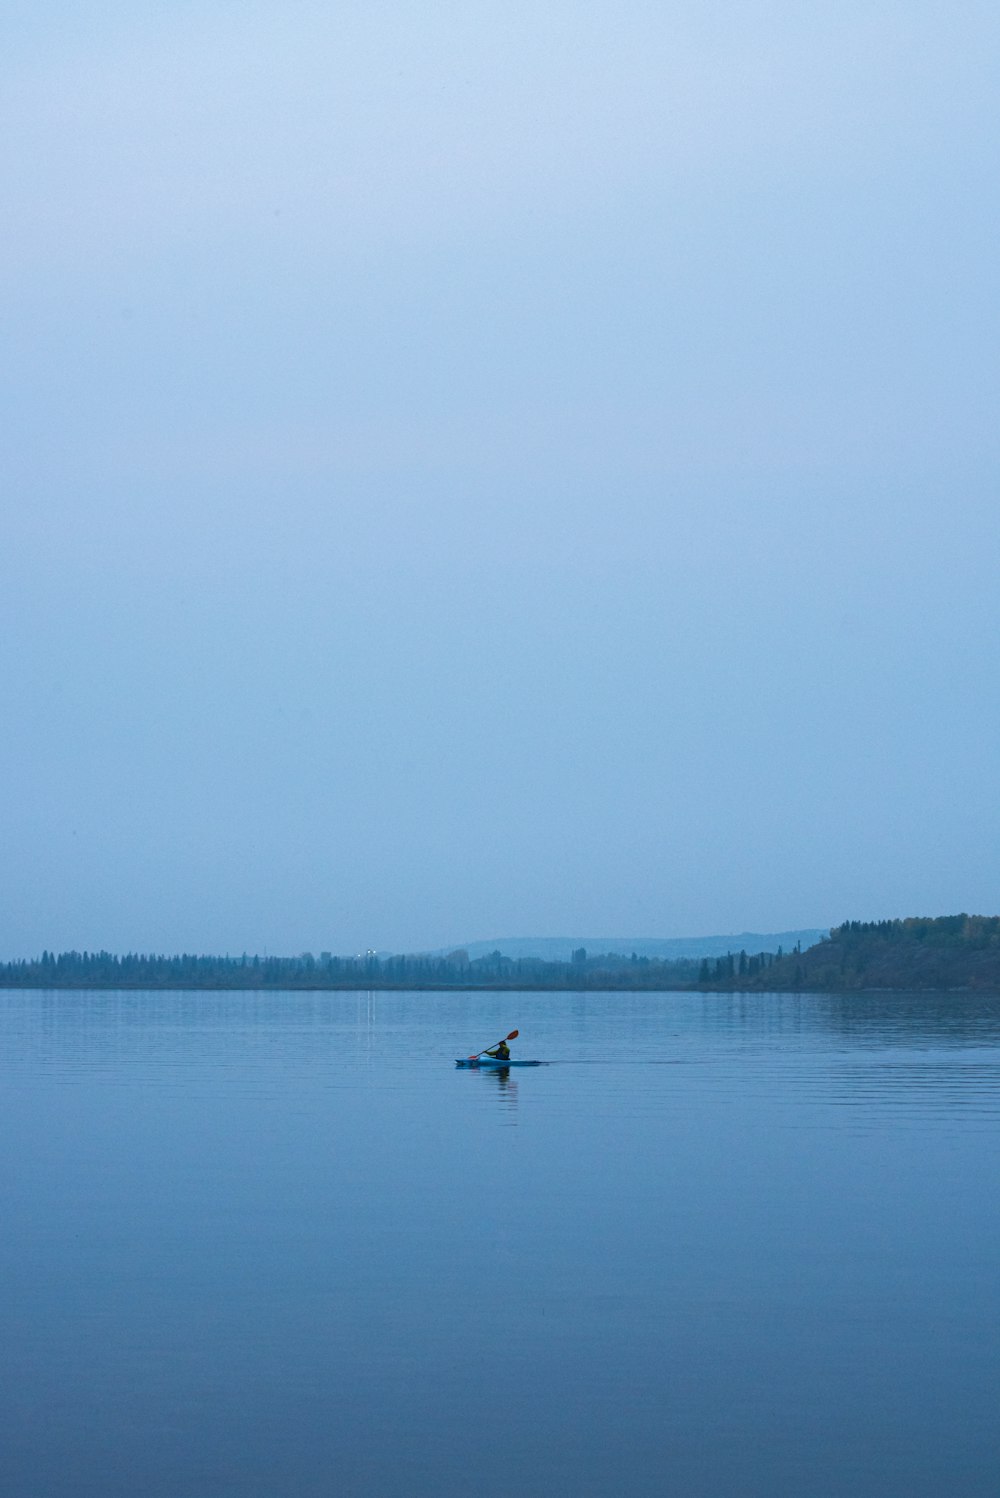 person in boat on lake during daytime